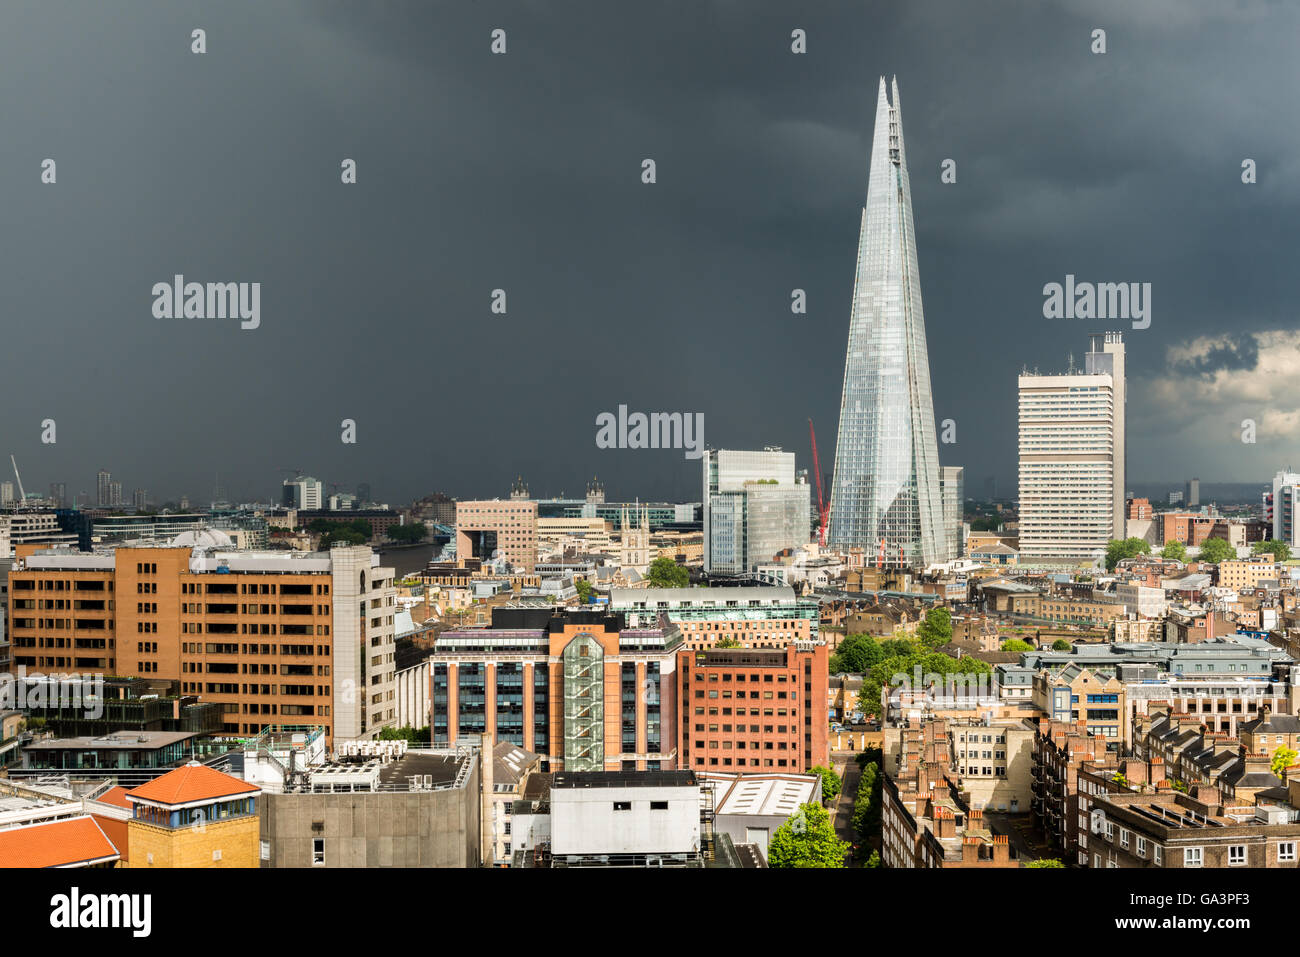 London, United Kingdom - June 25, 2016: London Skyline with moody sky seconds before a storm, with Shard in front Stock Photo